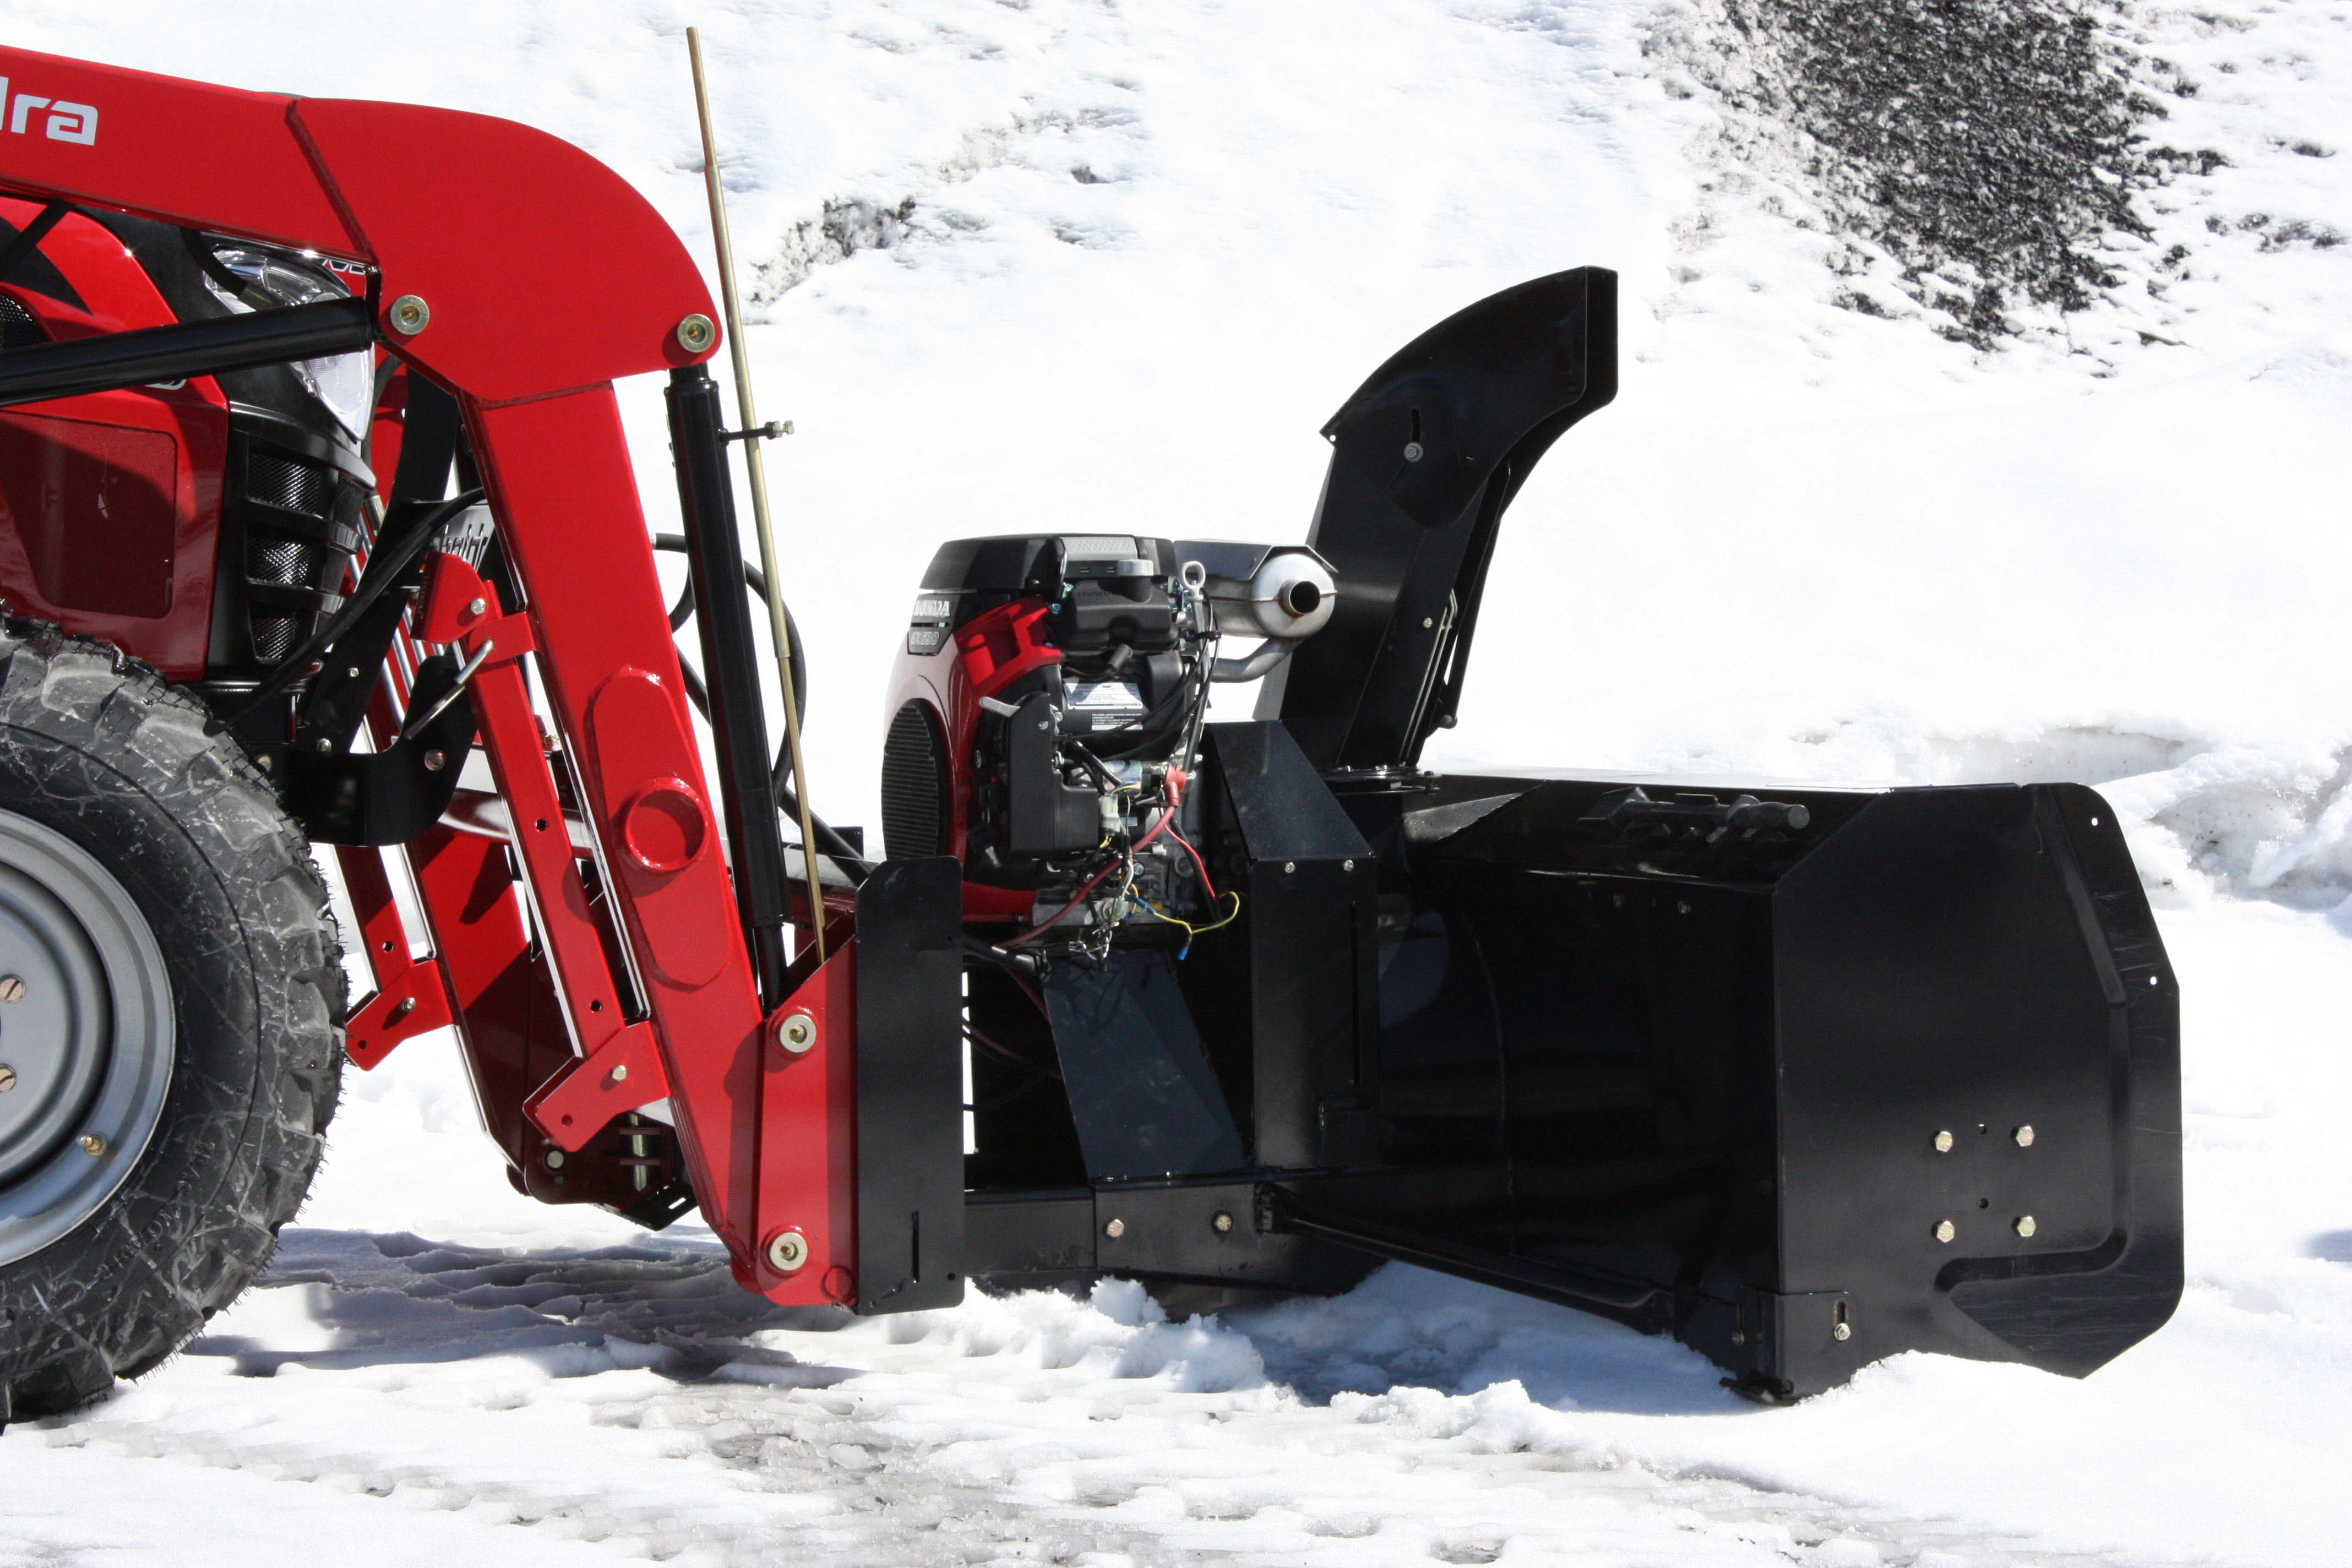 48" Versatile Plus Snowblower for tractors equipped with "Skid Steer" style attach